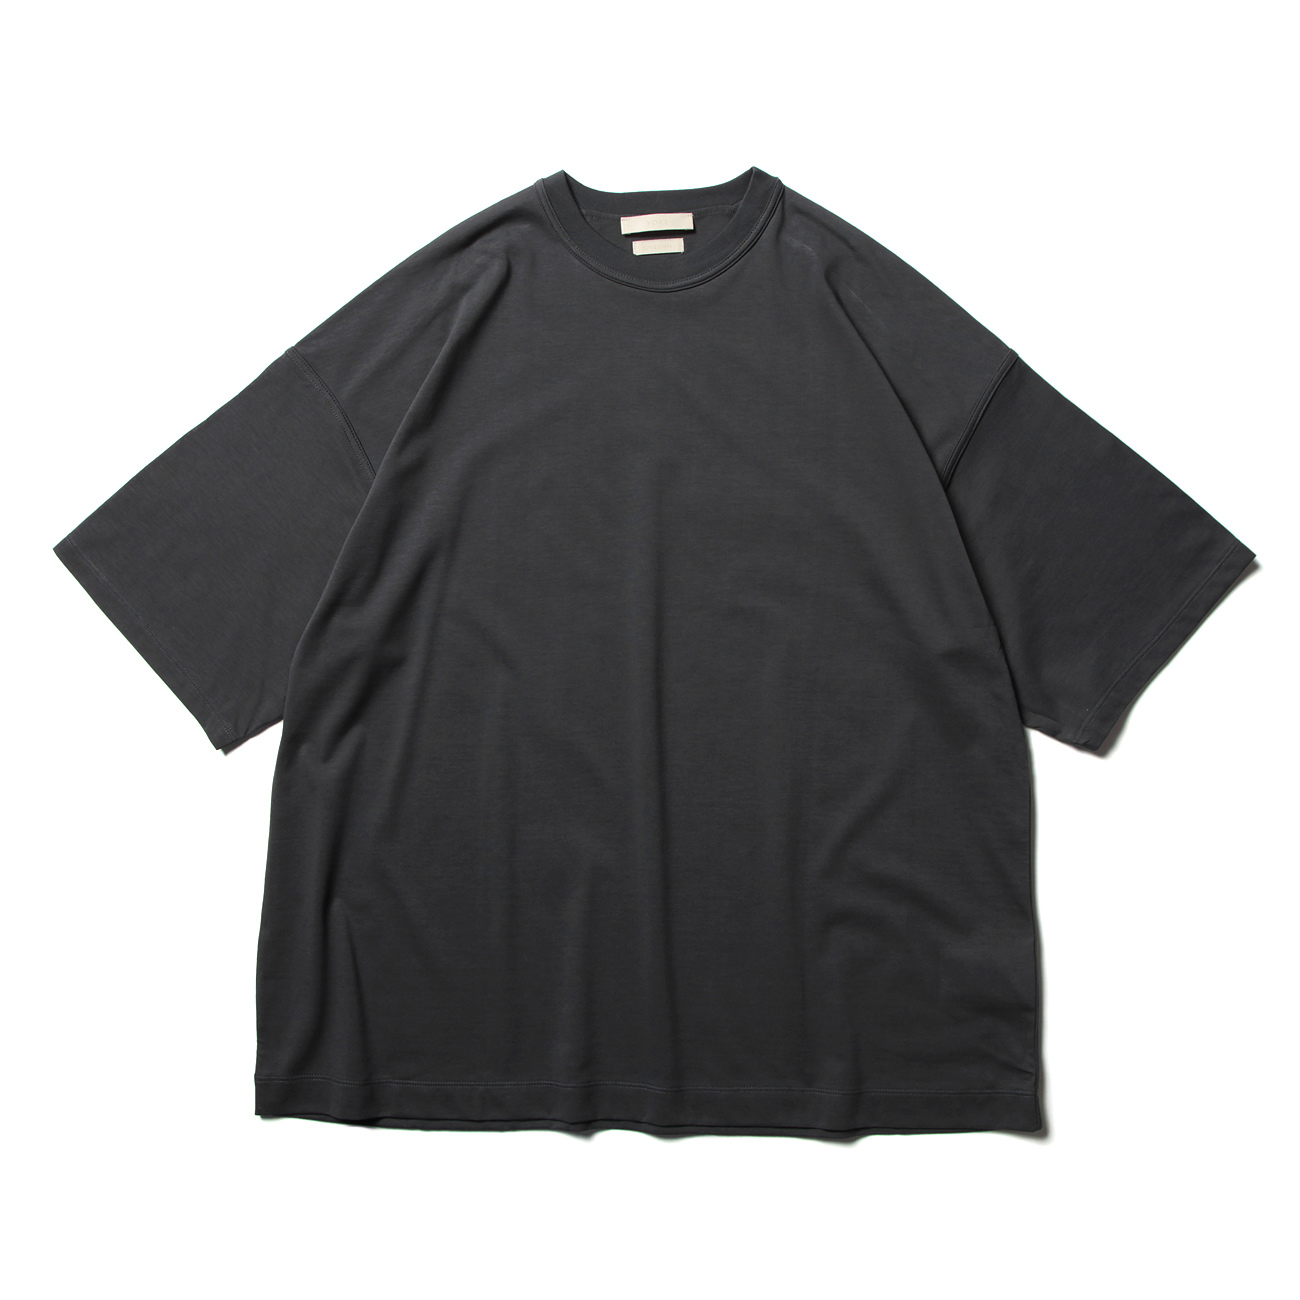 OVERSIZED INSIDE-OUT T-SHIRT - Dusty Navy